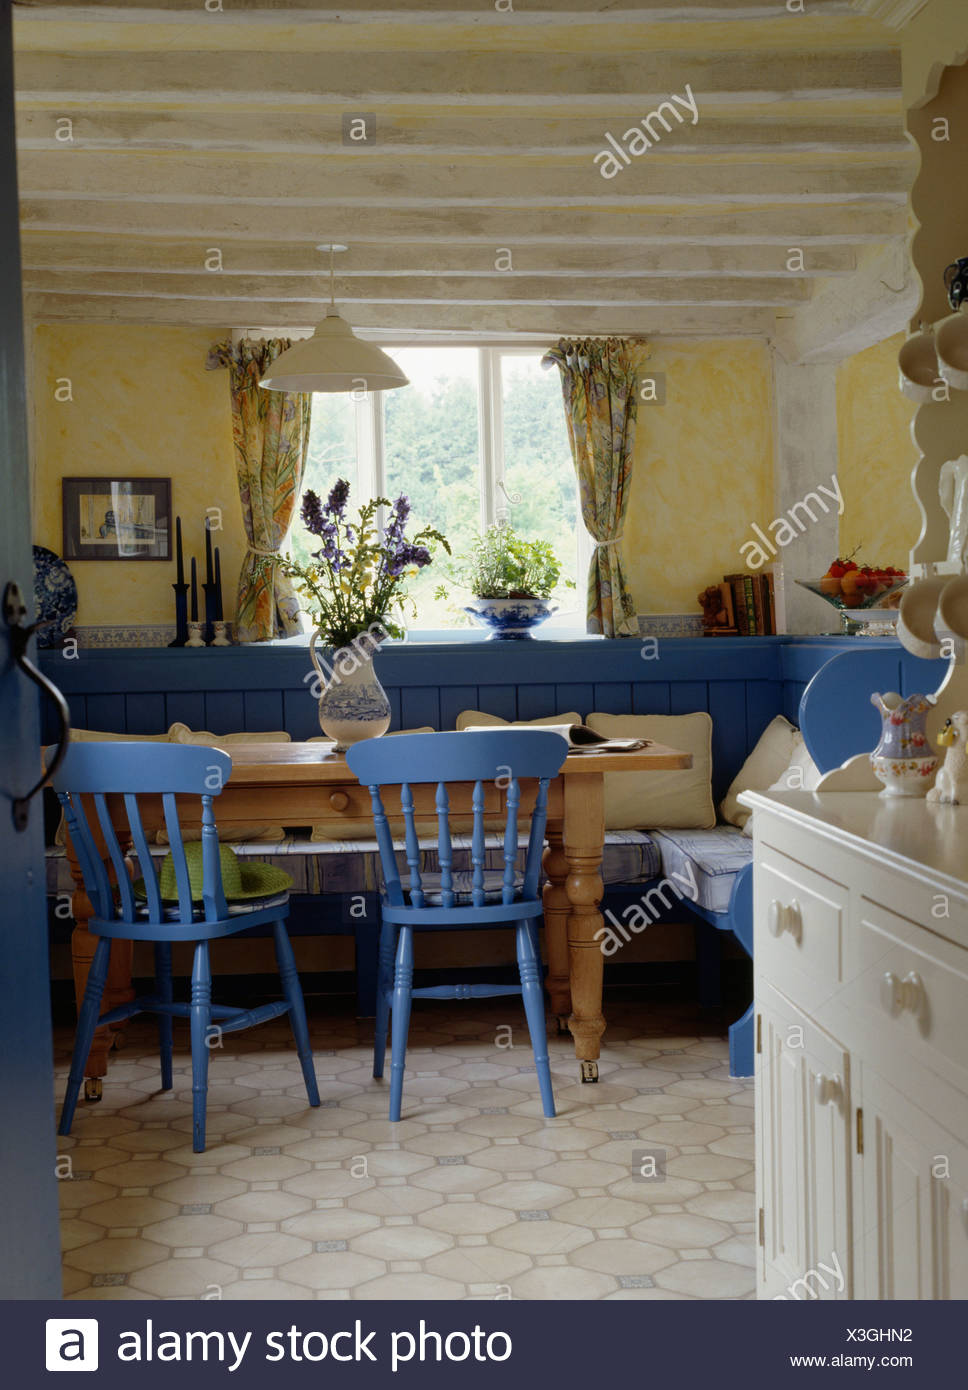 Painted Blue Chairs And Settles In Yellow Cottage Kitchen Dining